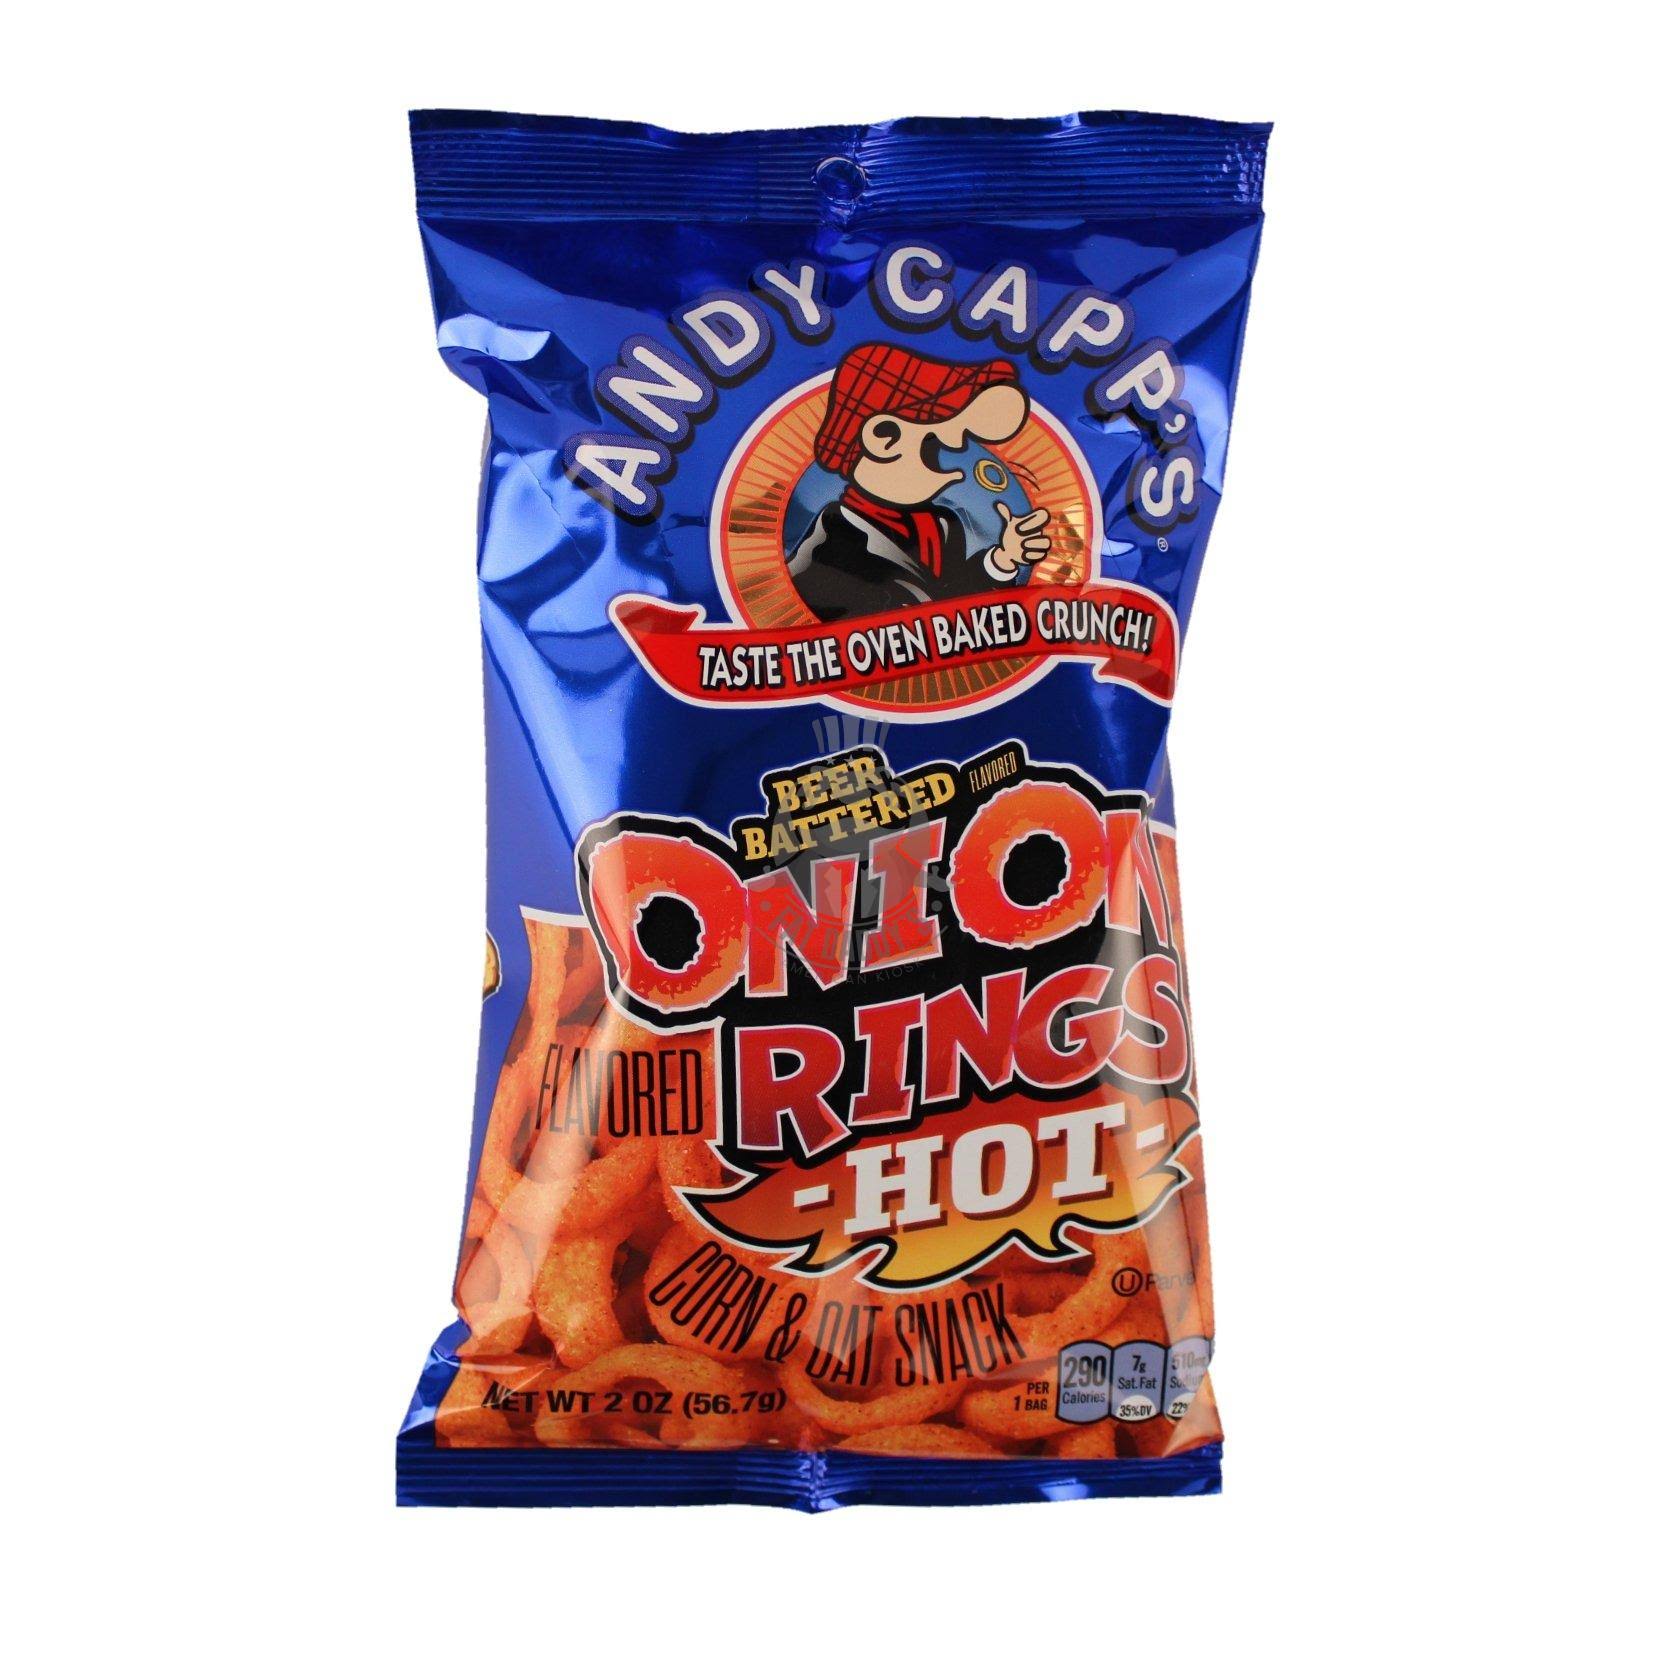 Andy Capp's Beer Battered Flavored Onion Flavored Rings Baked Oat and Corn Snacks, Hot, 2 oz